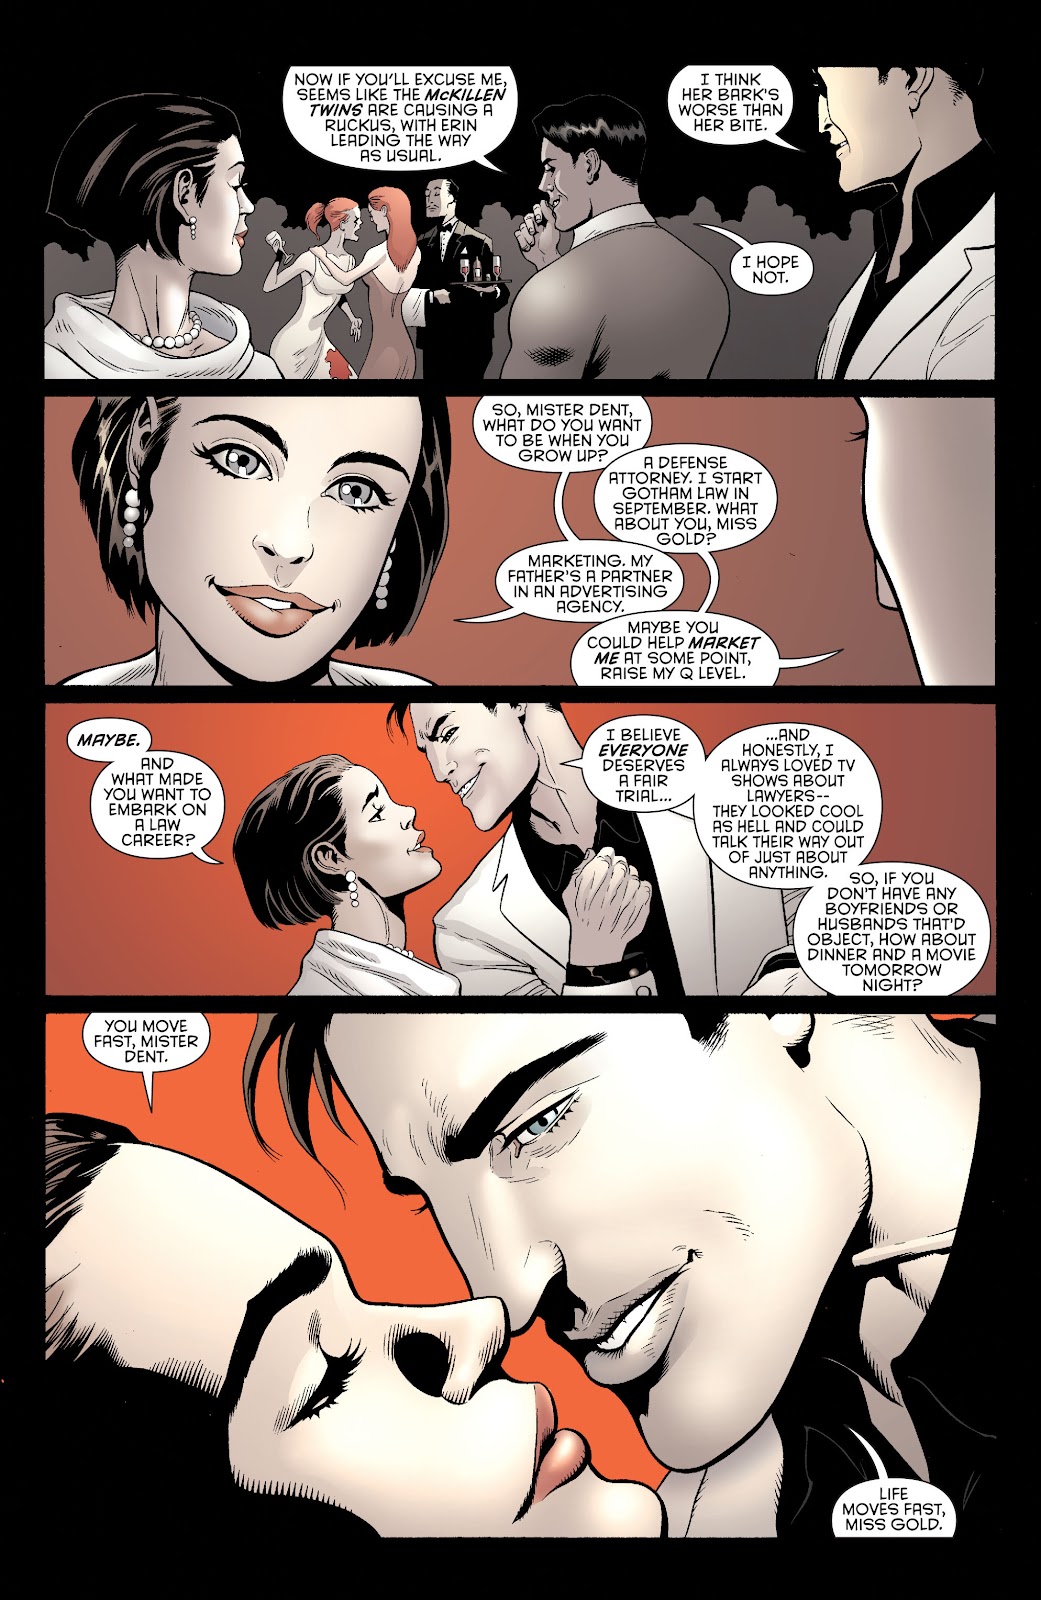 Batman and Robin (2011) issue 28 - Batman and Two-Face - Page 12